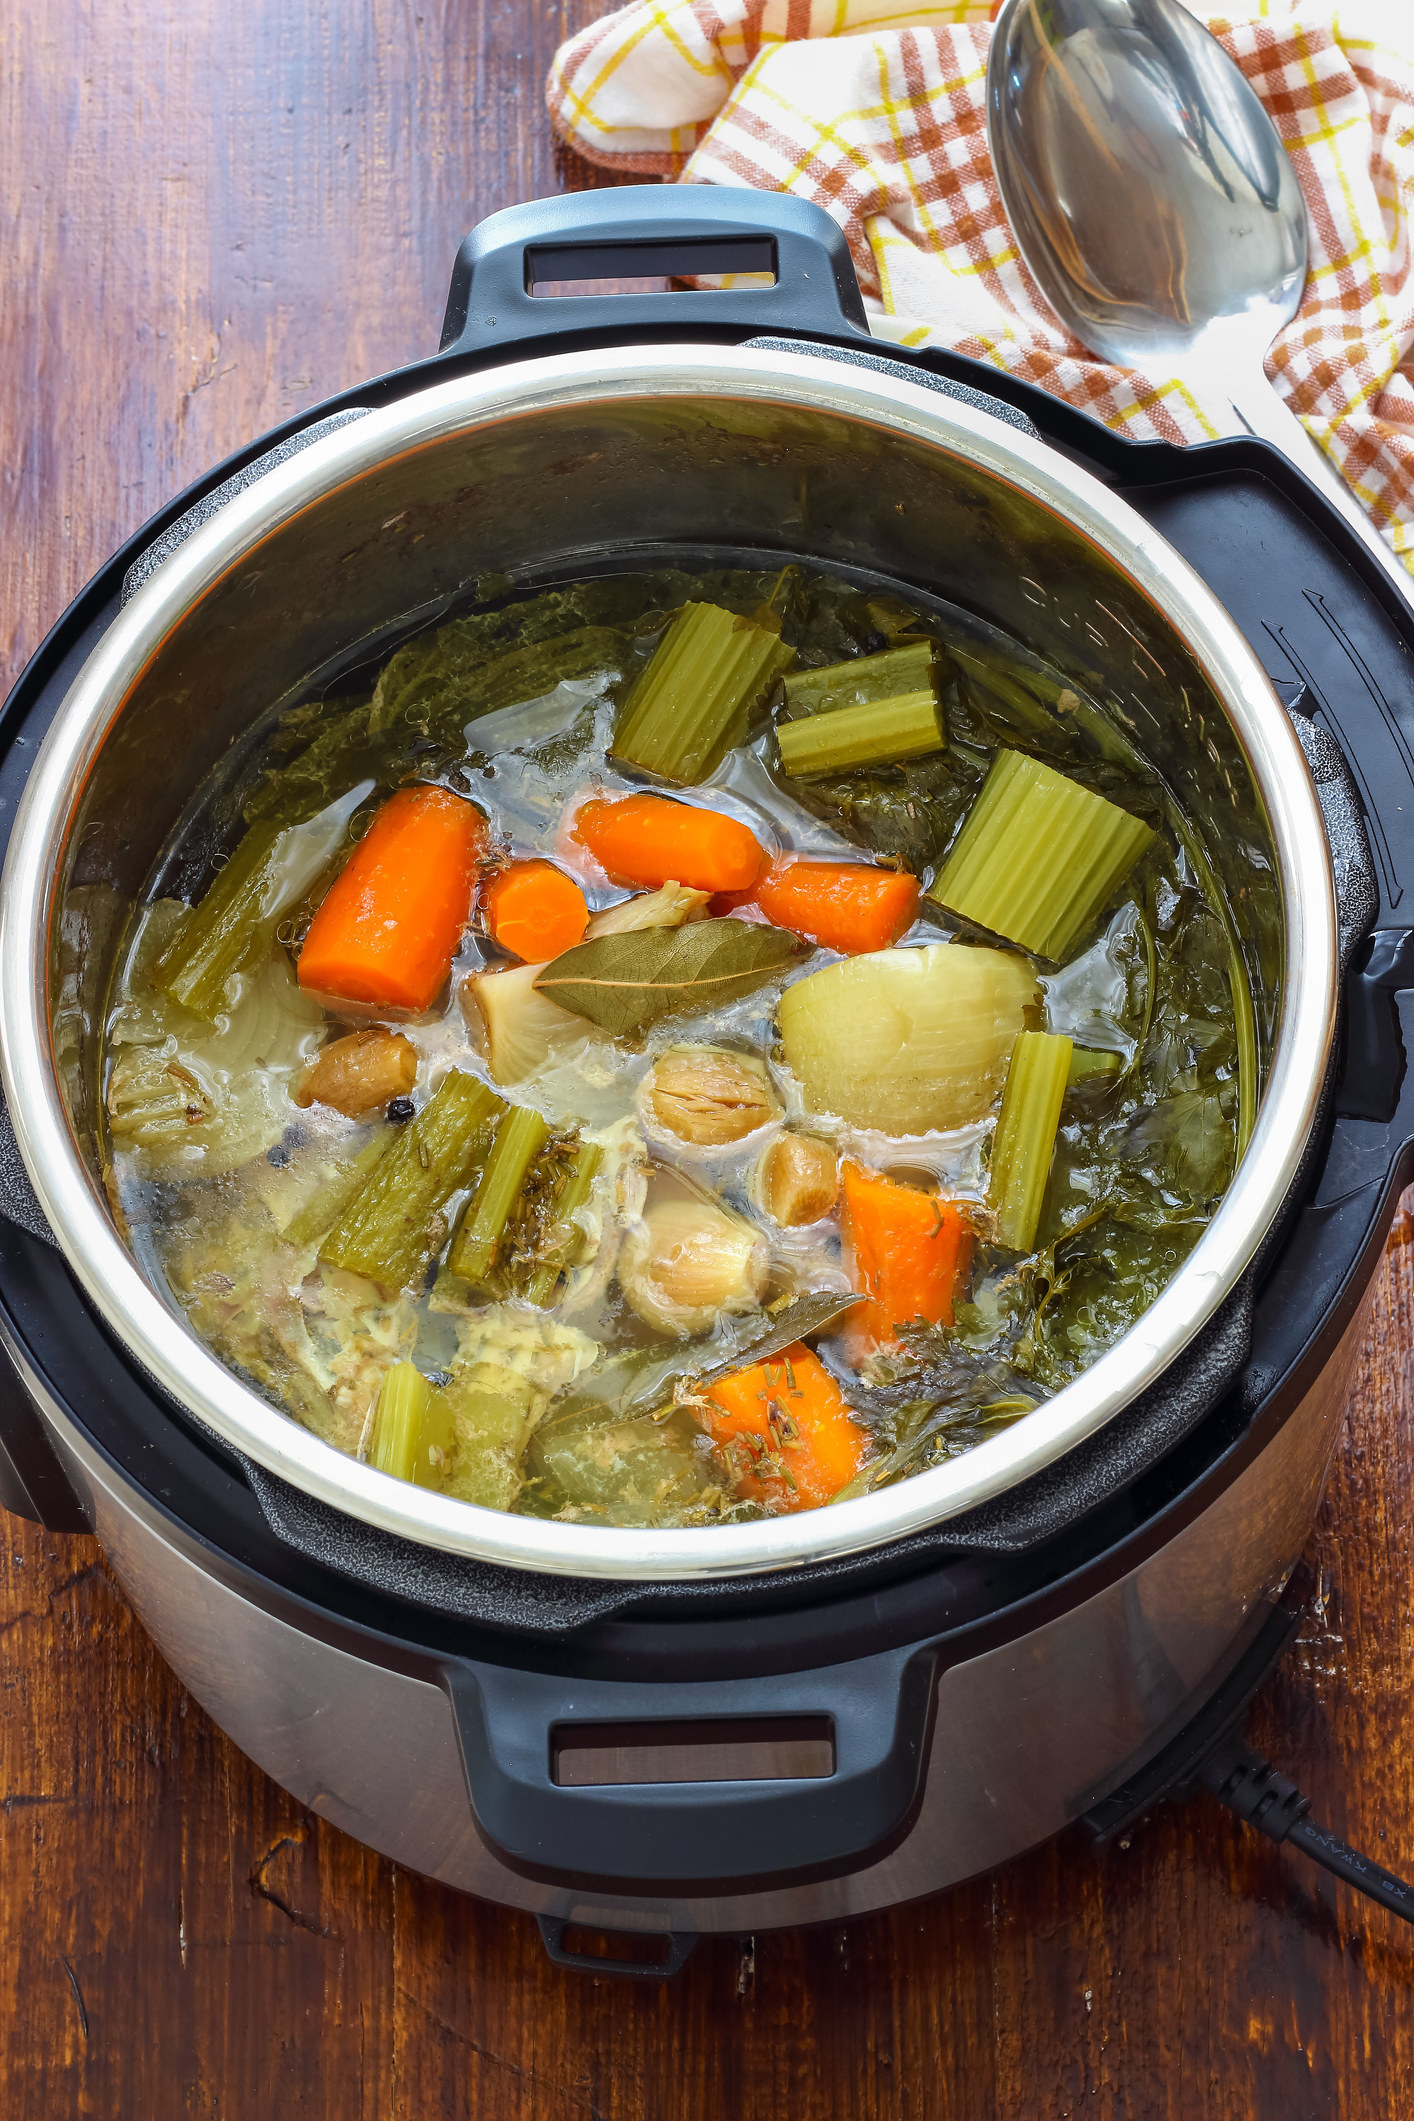 How To Use That Instant Pot You Just Got